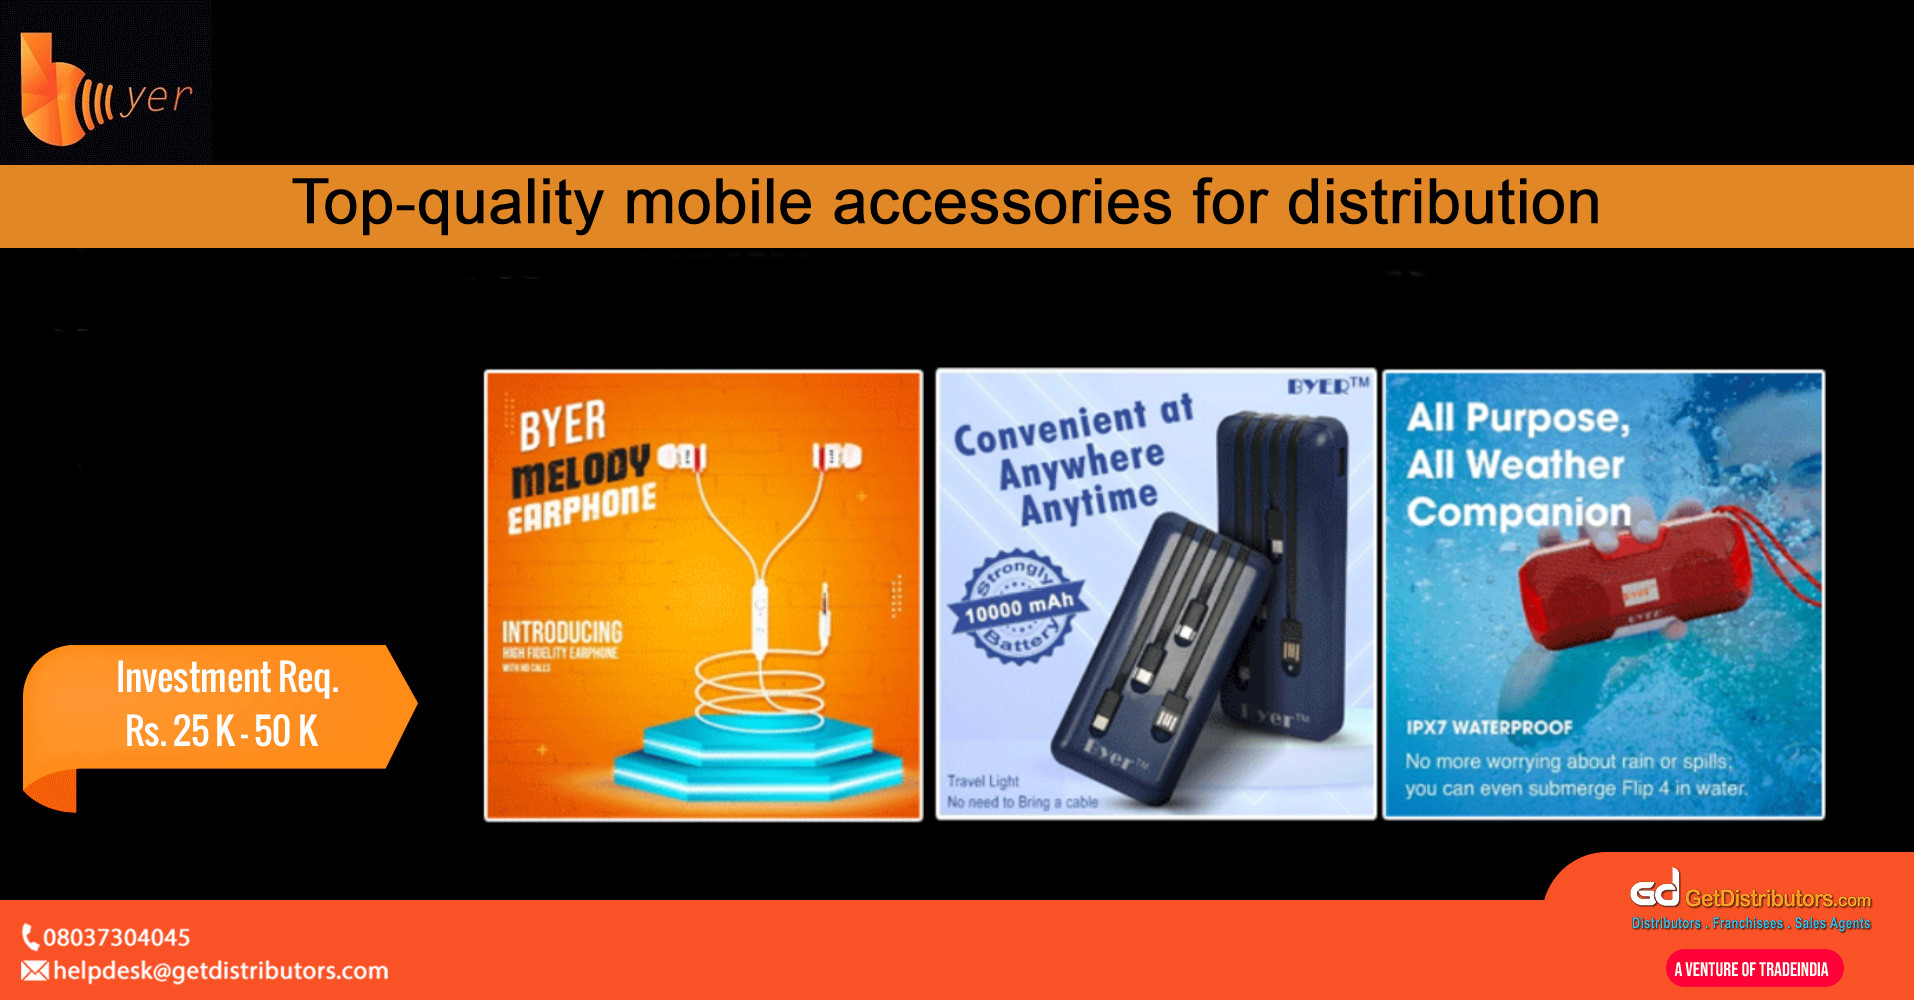 Top-quality mobile accessories for distribution